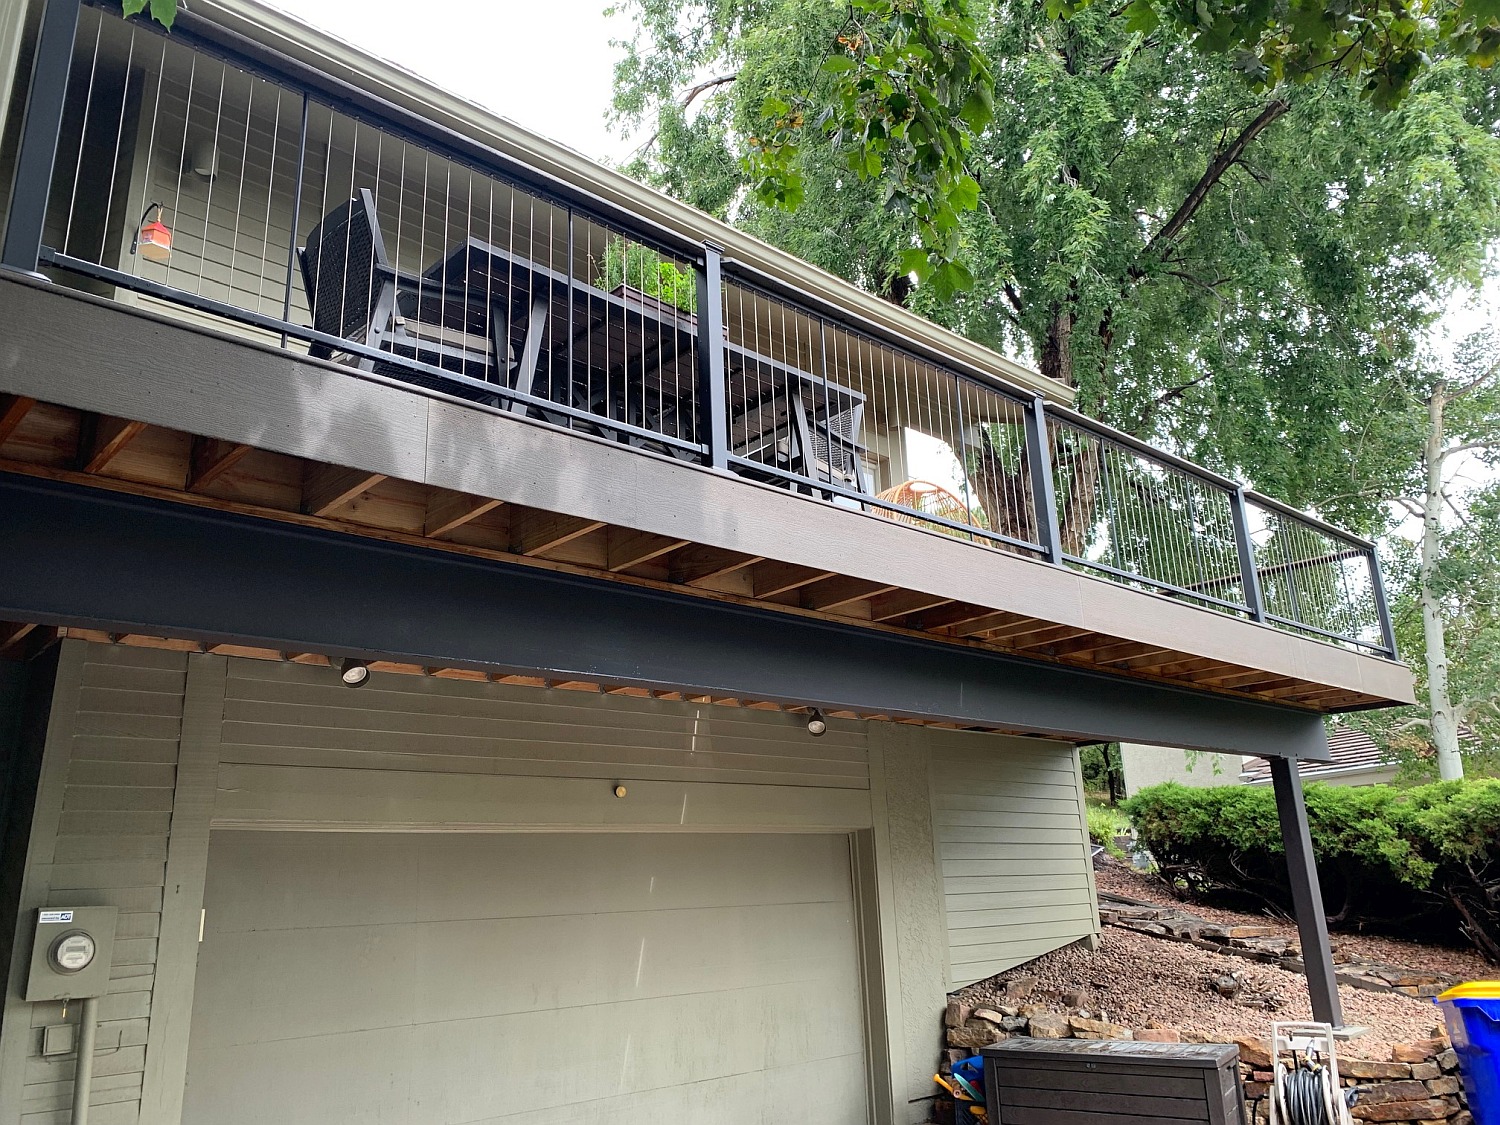 In order to build the new larger composite deck, we needed to add a metal beam to support the weight.